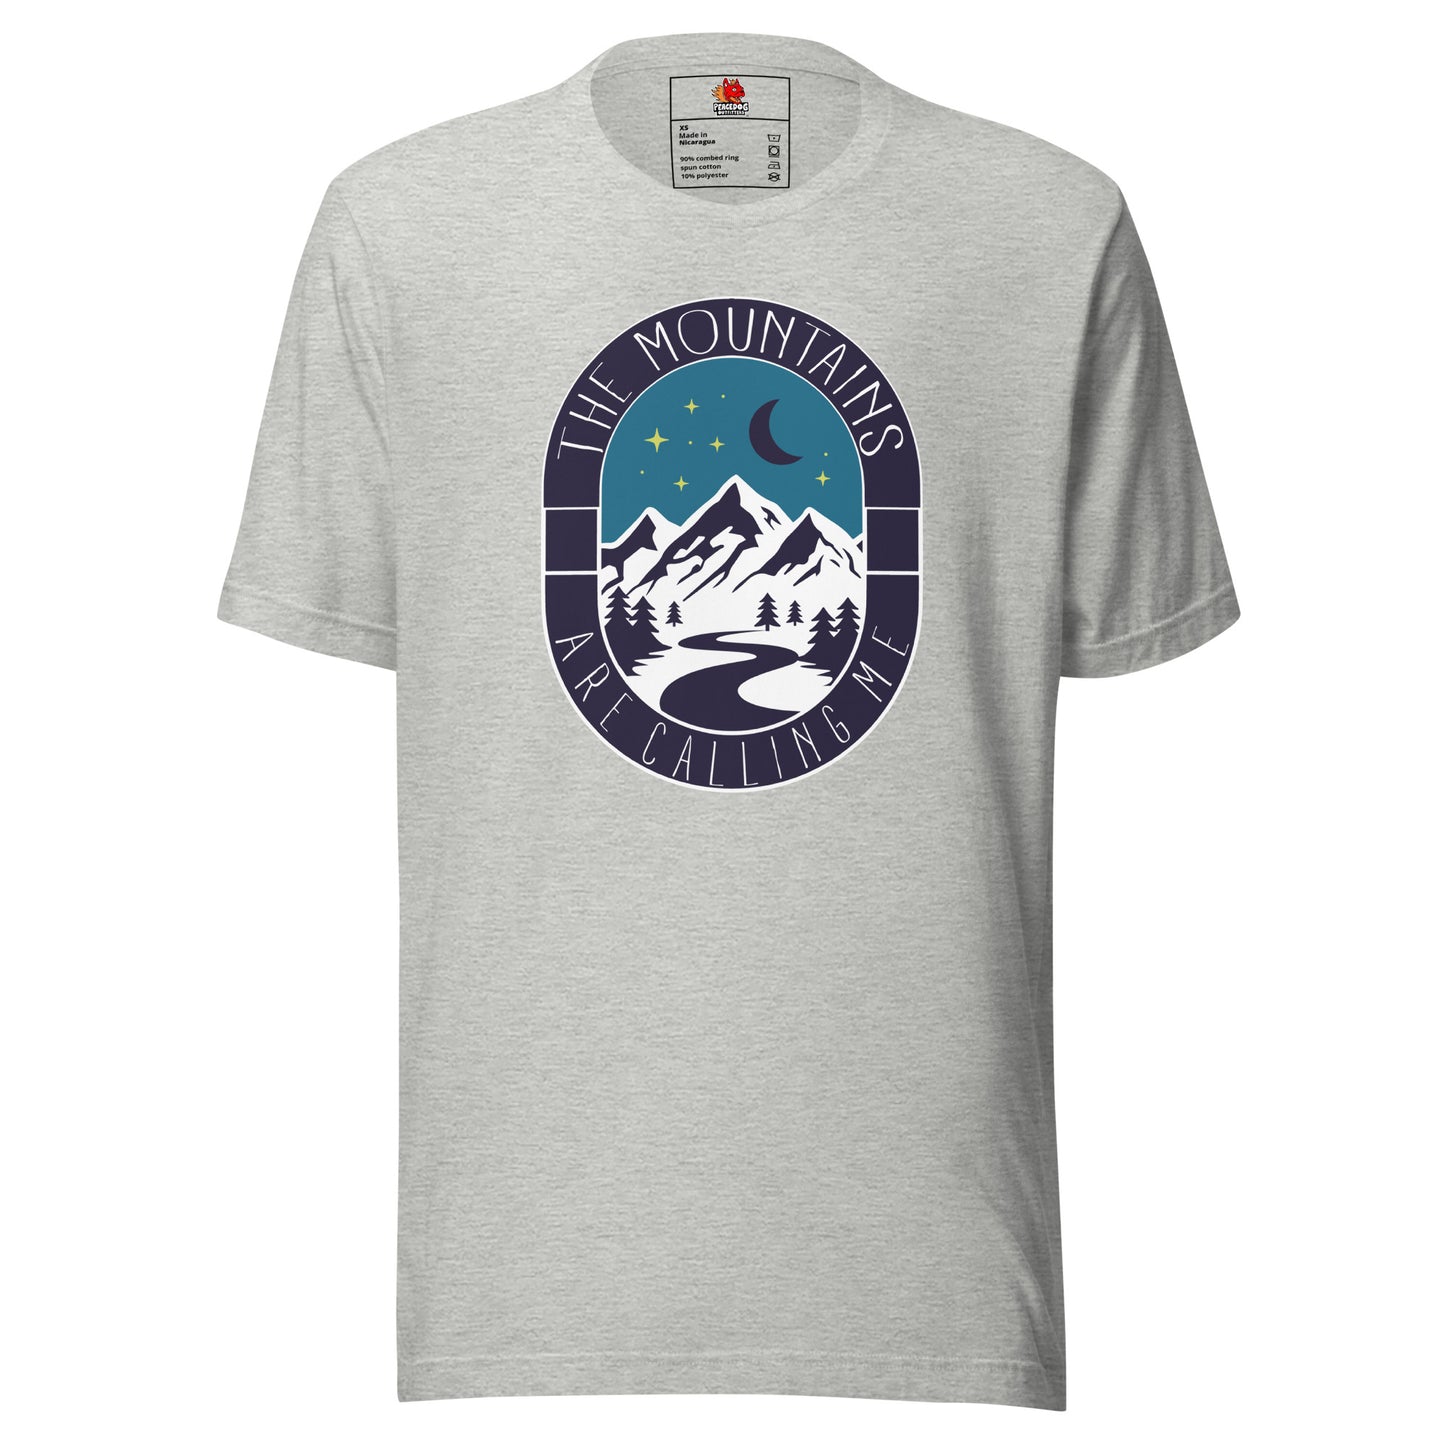 The Mountains are Calling Me T-Shirt